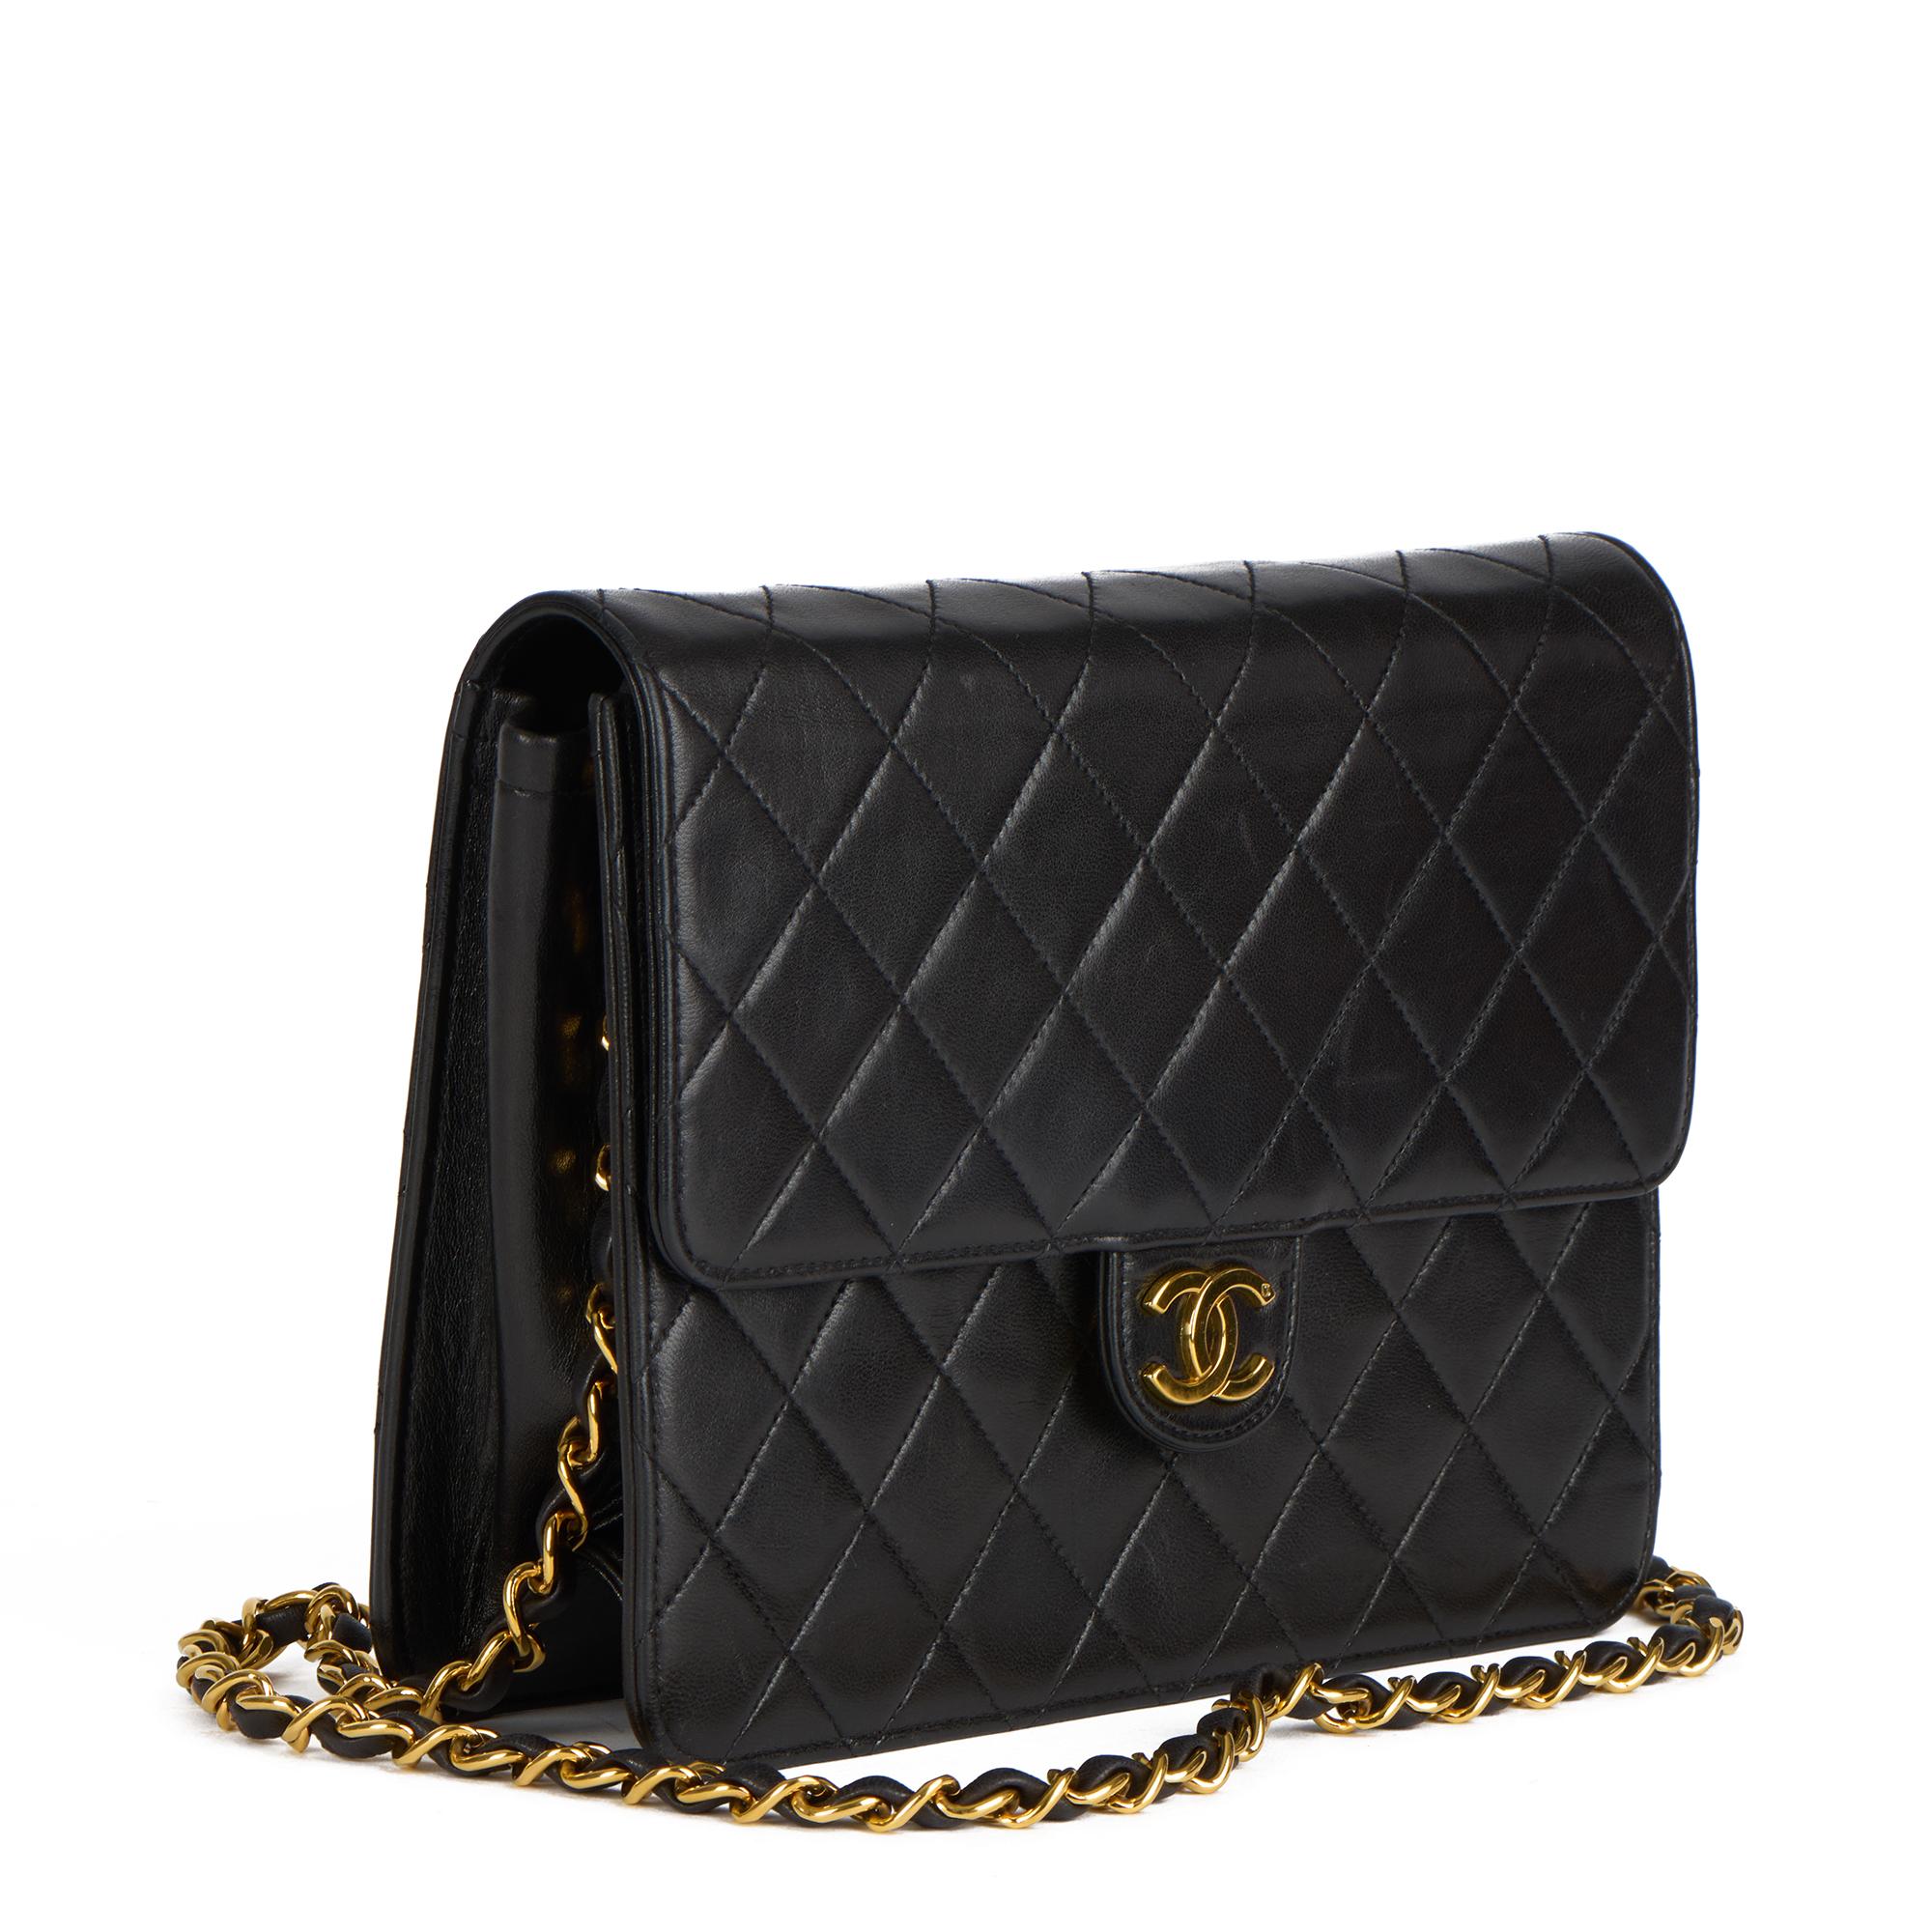 CHANEL
Black Quilted Lambskin Vintage Small Classic Single Flap Bag

Xupes Reference: HB4174
Serial Number: 3272619
Age (Circa): 1996
Accompanied By: Authenticity Card, Care Booklet
Authenticity Details: Authenticity Card, Serial Sticker (Made in